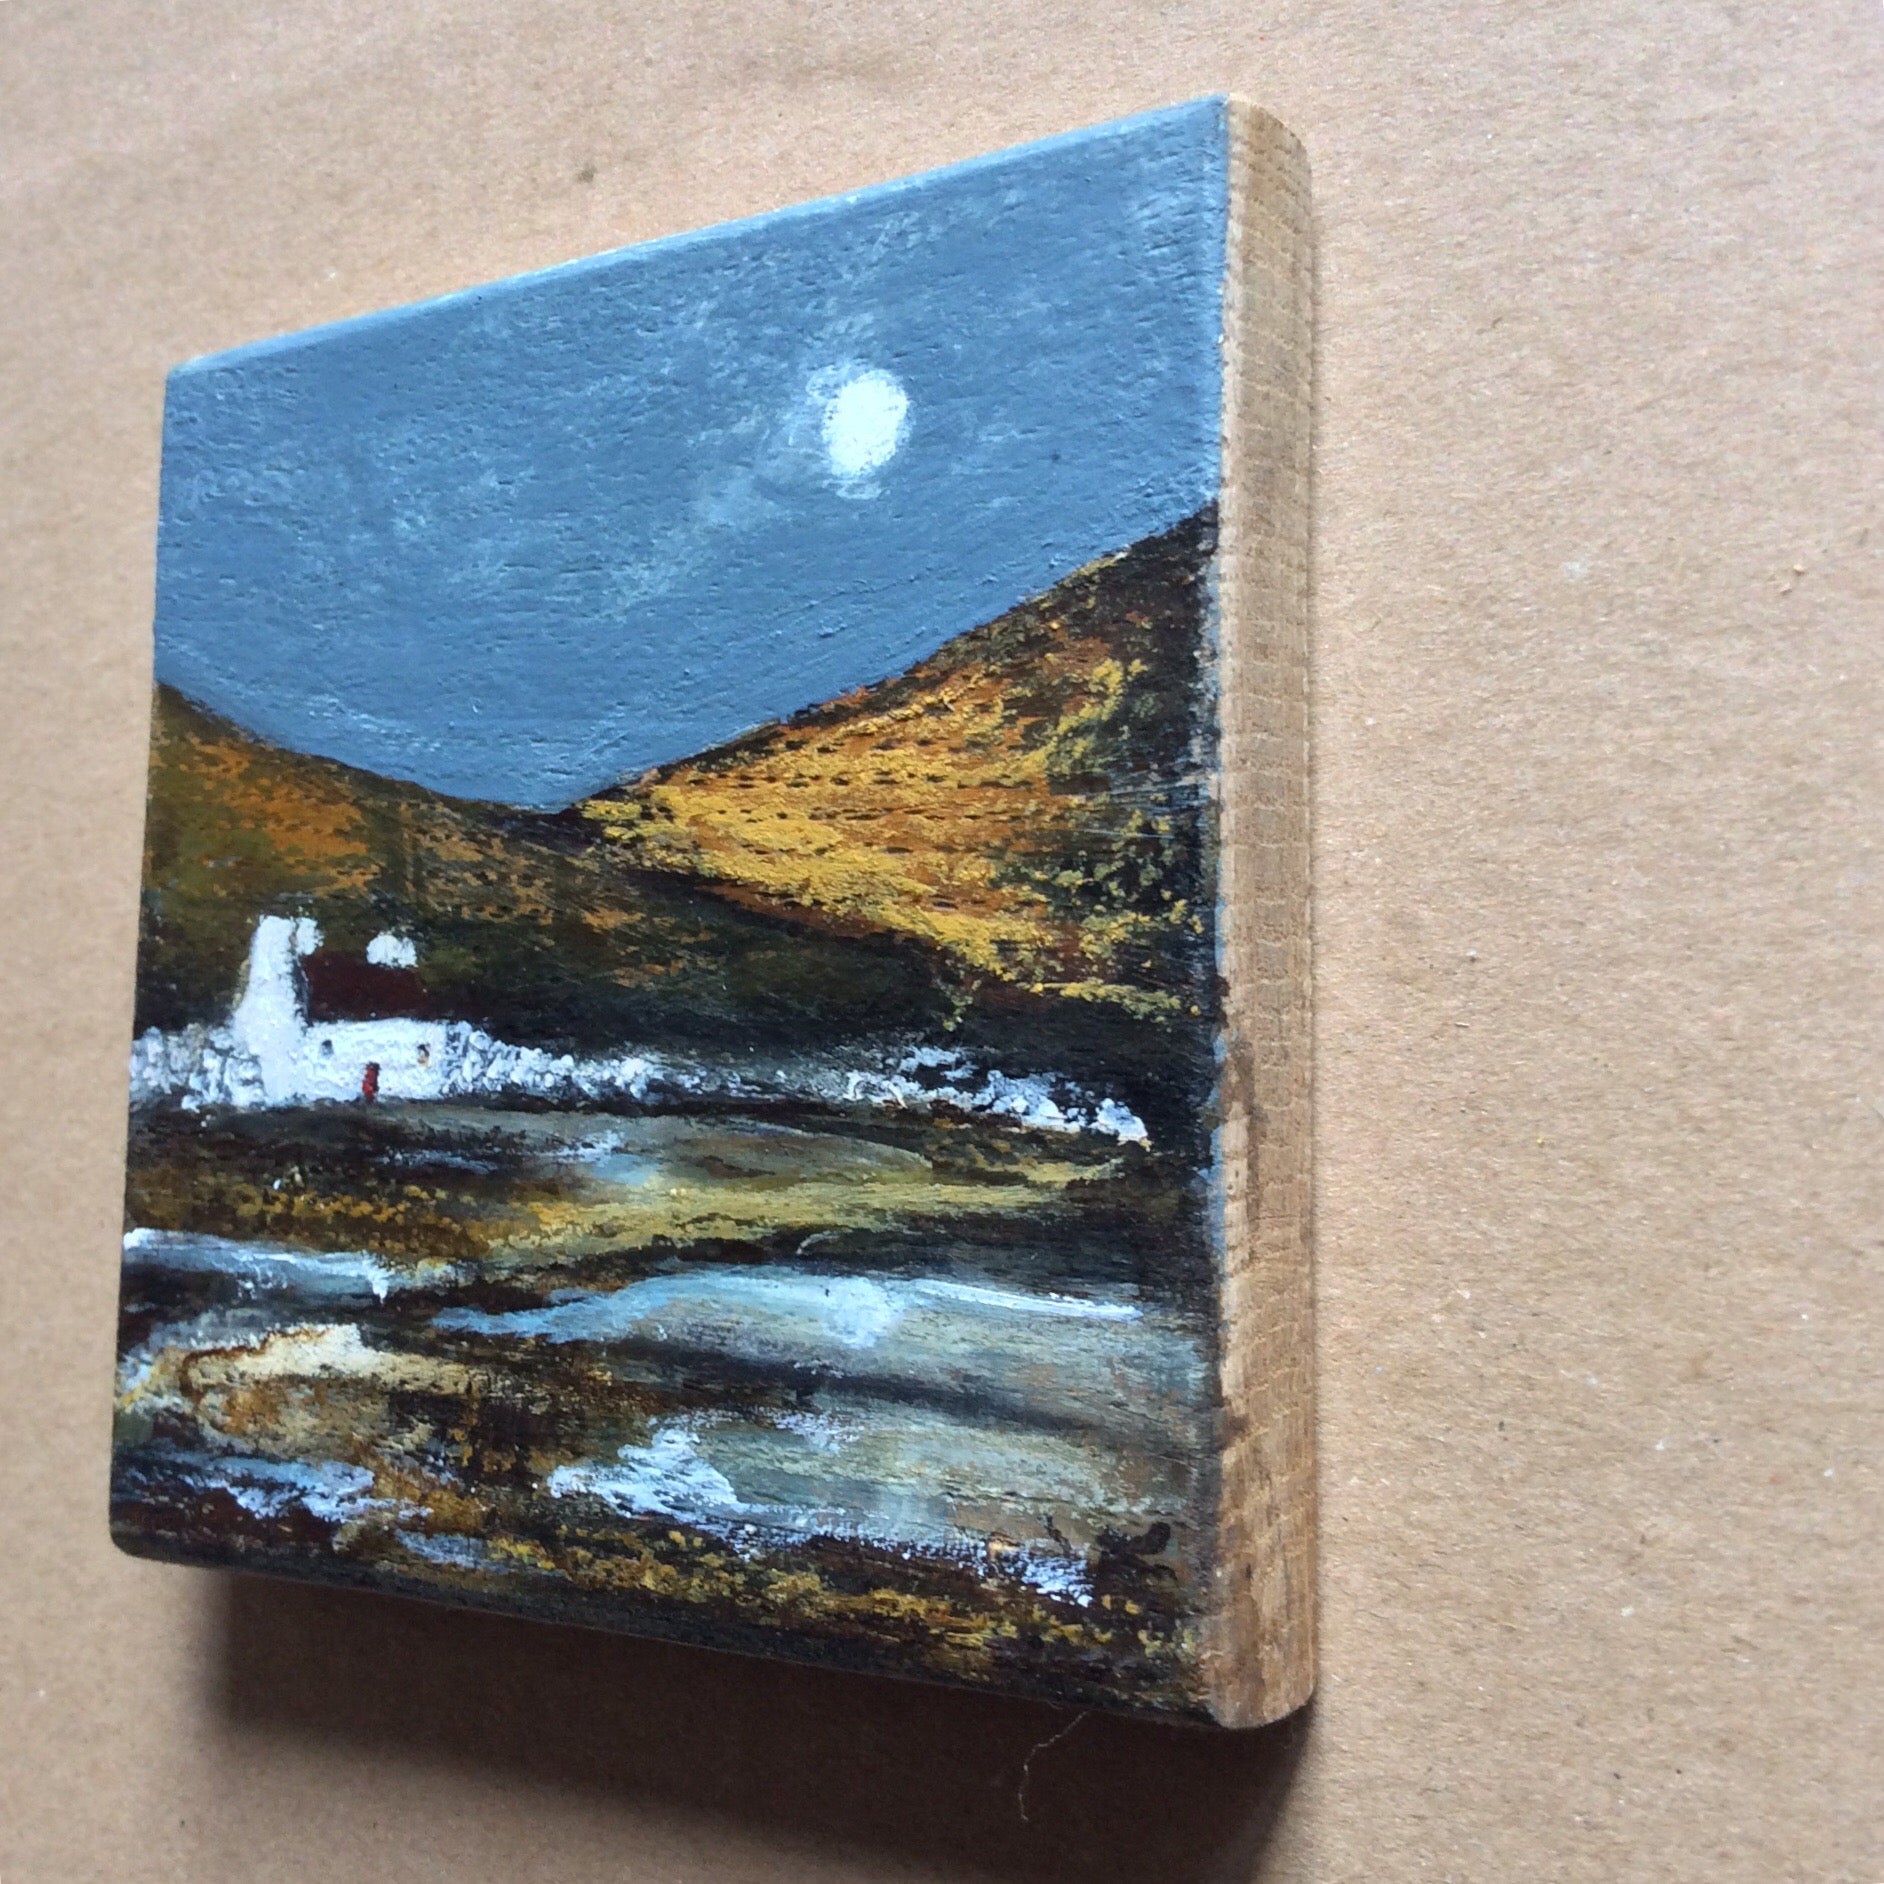 Mini Mixed Media Art on wood By Louise O'Hara - "Deep in the valley"